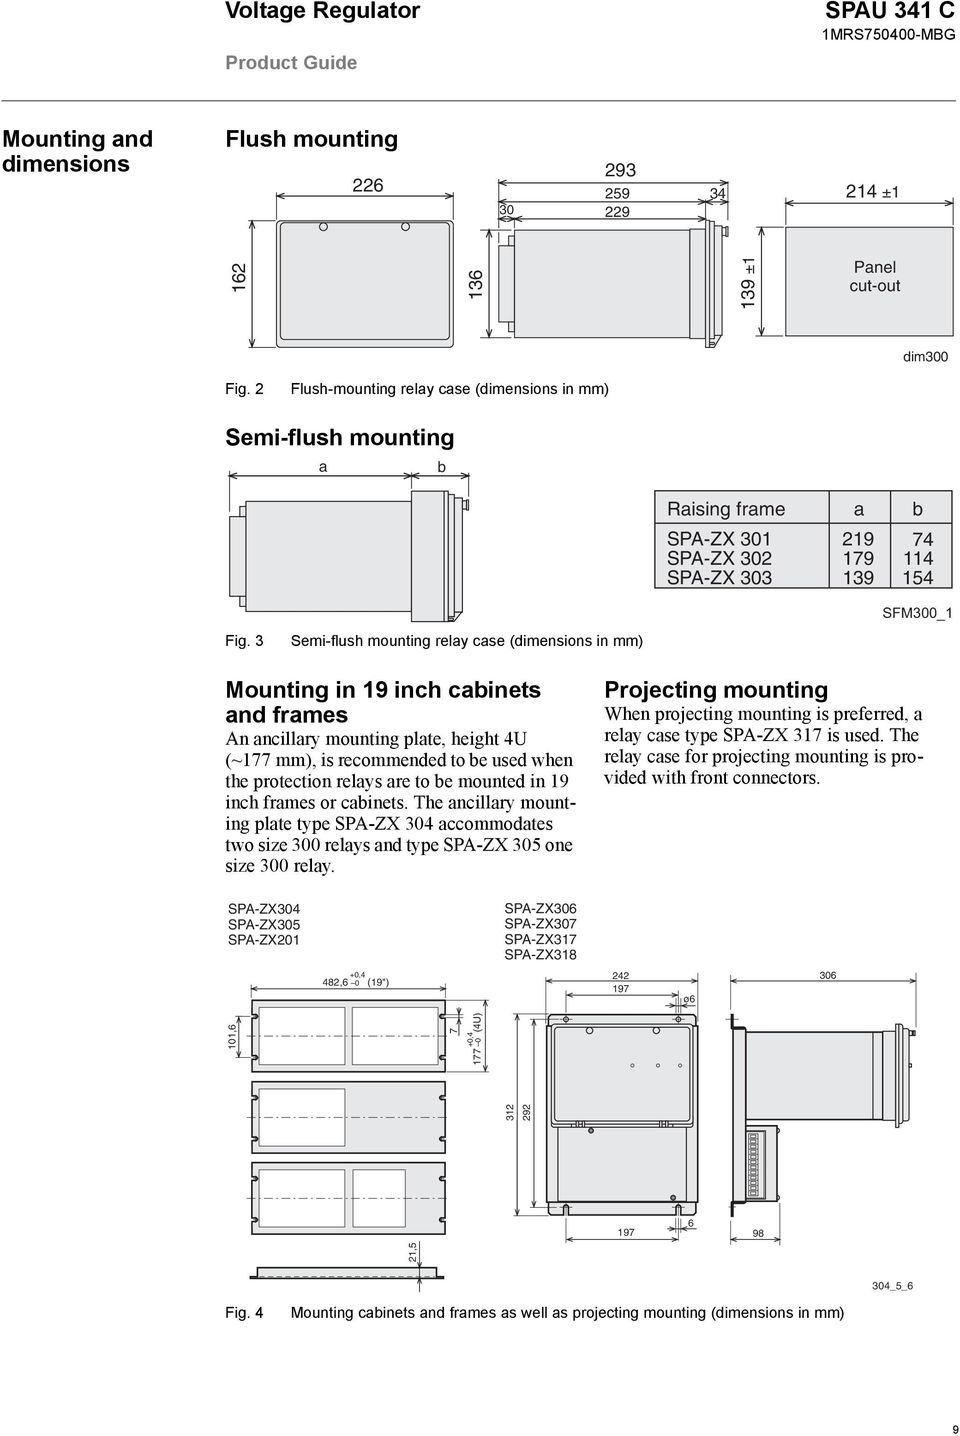 3 Semi-flush mounting relay case (dimensions in mm) Mounting in 19 inch cabinets and frames An ancillary mounting plate, height 4U (~177 mm), is recommended to be used when the protection relays are